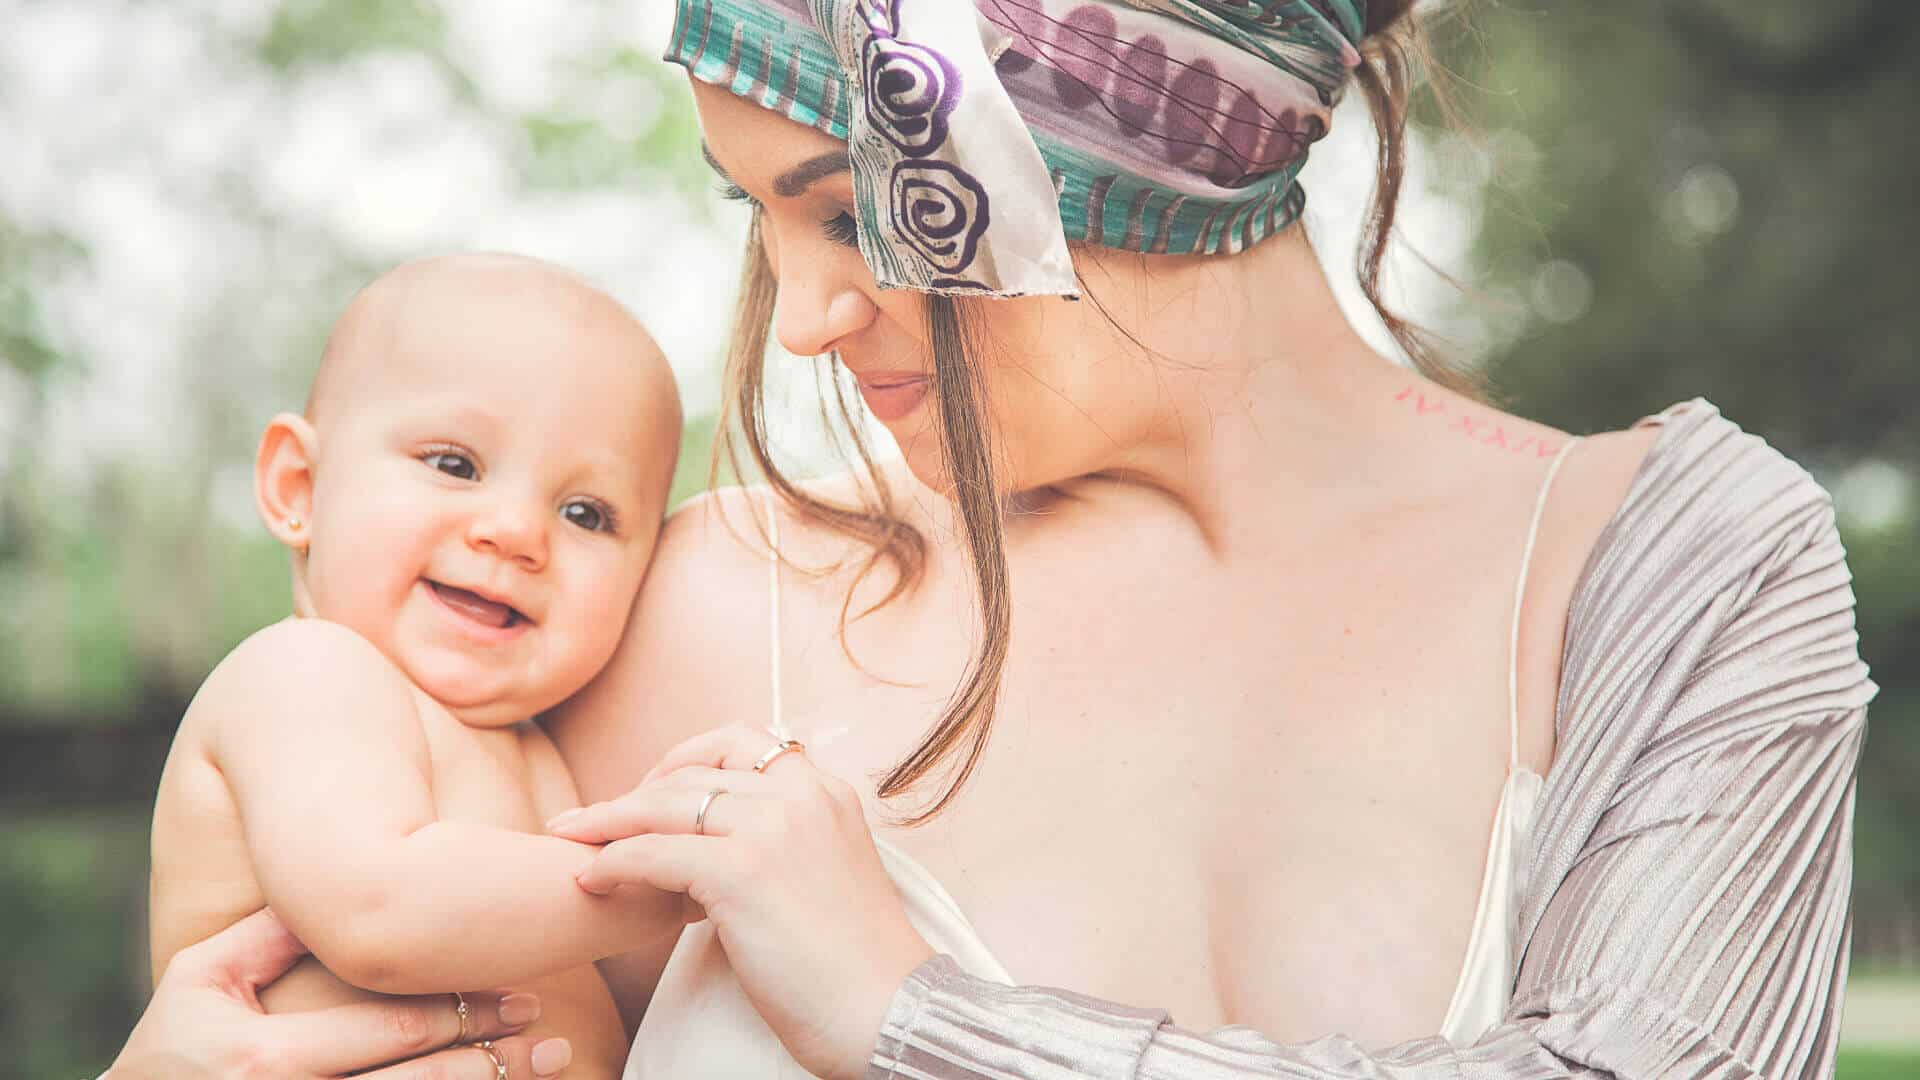 Mother holding her newborn in a very joyous photoshoot